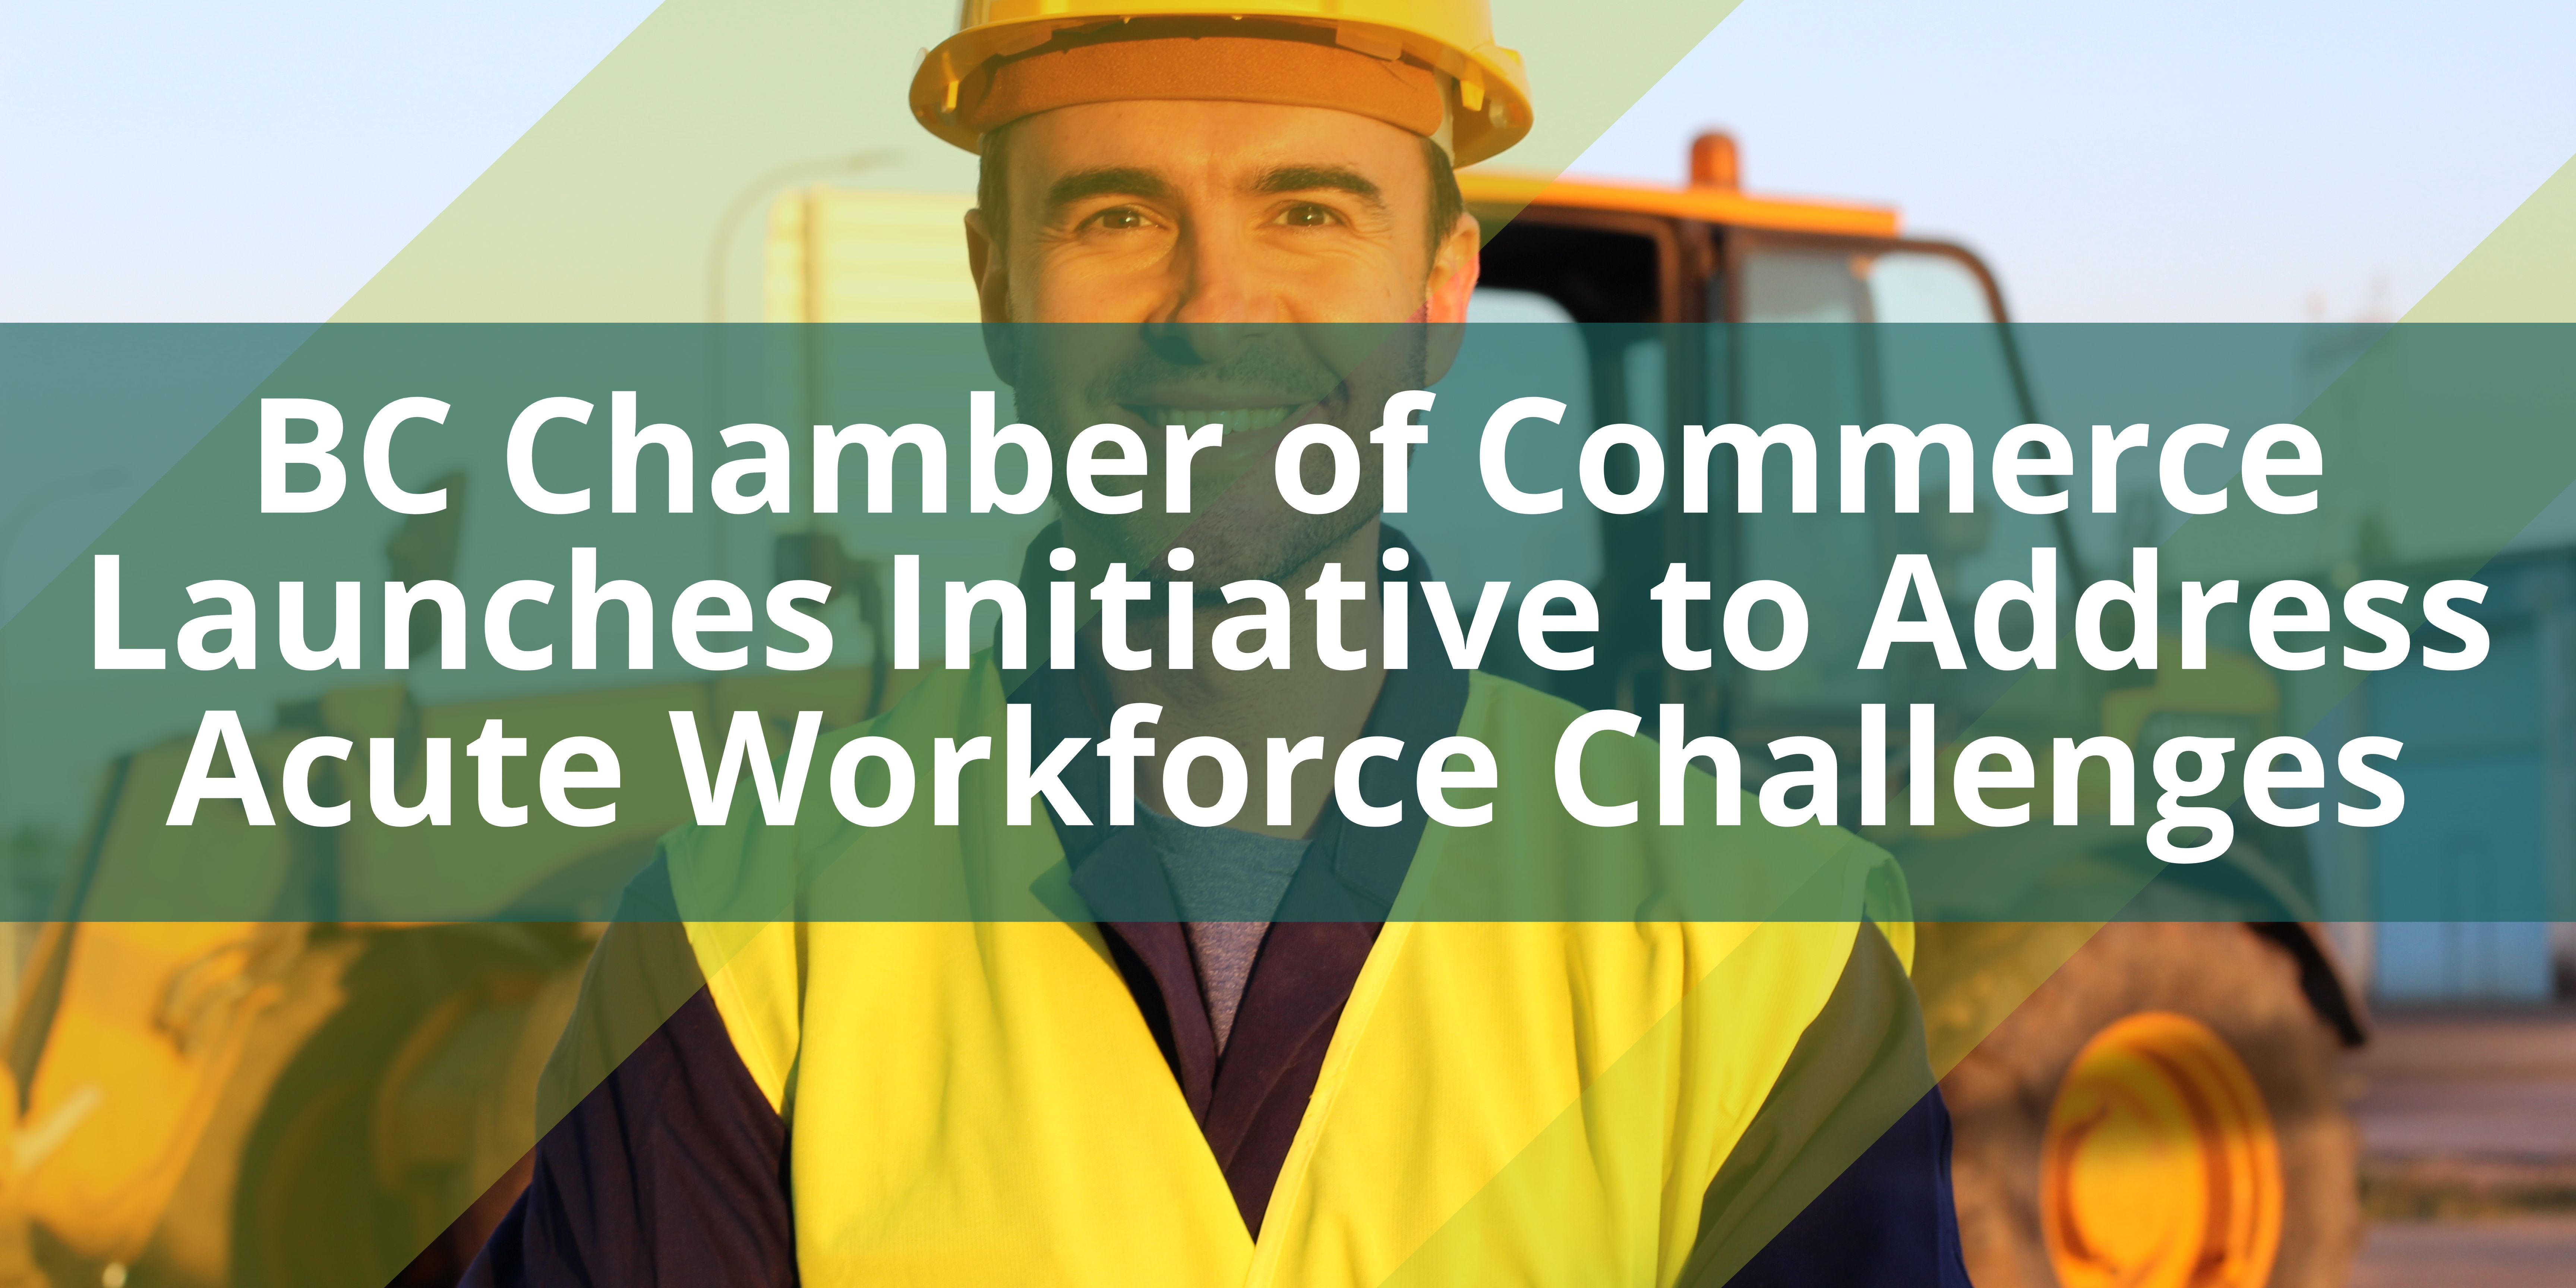 BC Chamber of Commerce Launches Initiative to Address Acute Workforce Challenges